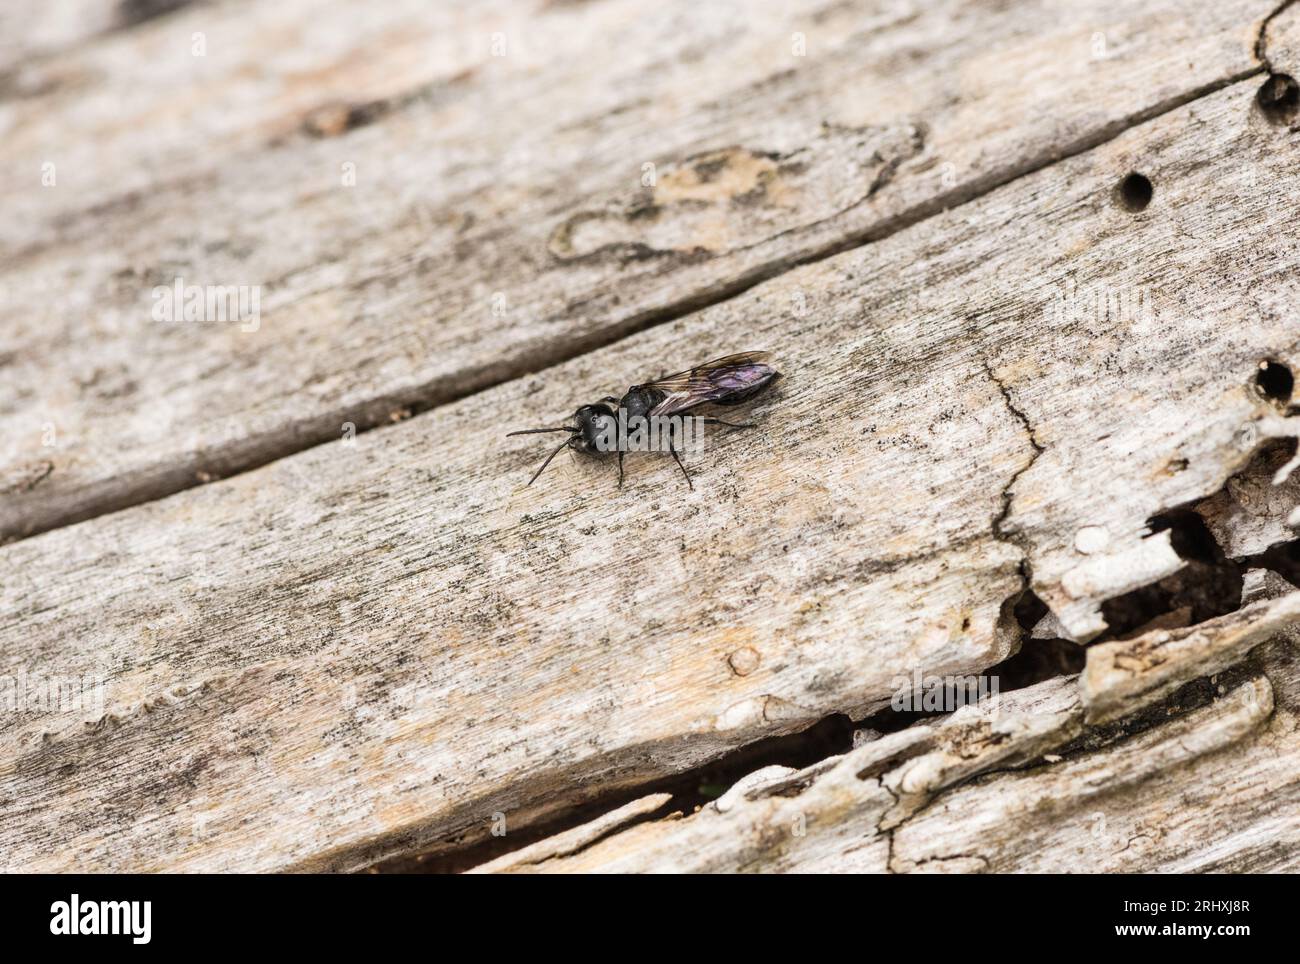 Resting Aphid Wasp (Pemphredon sp) Stock Photo